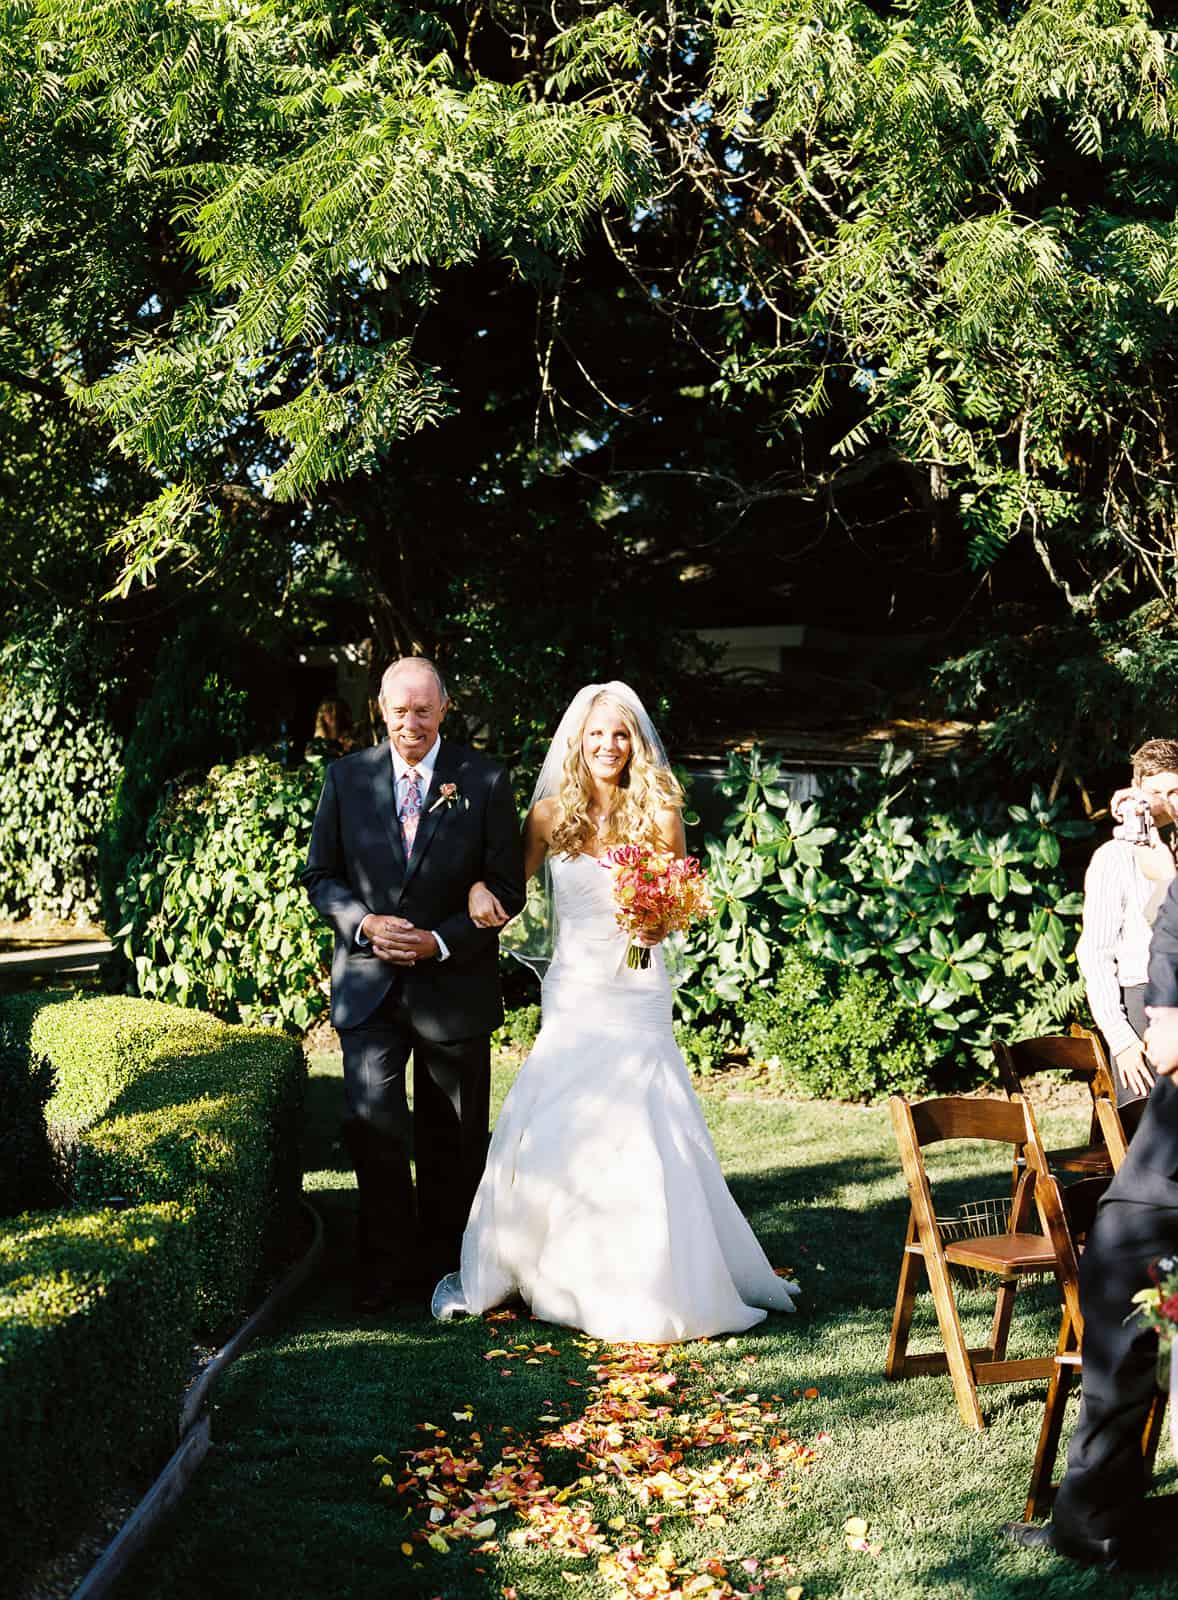 Father walking bride down the aisle